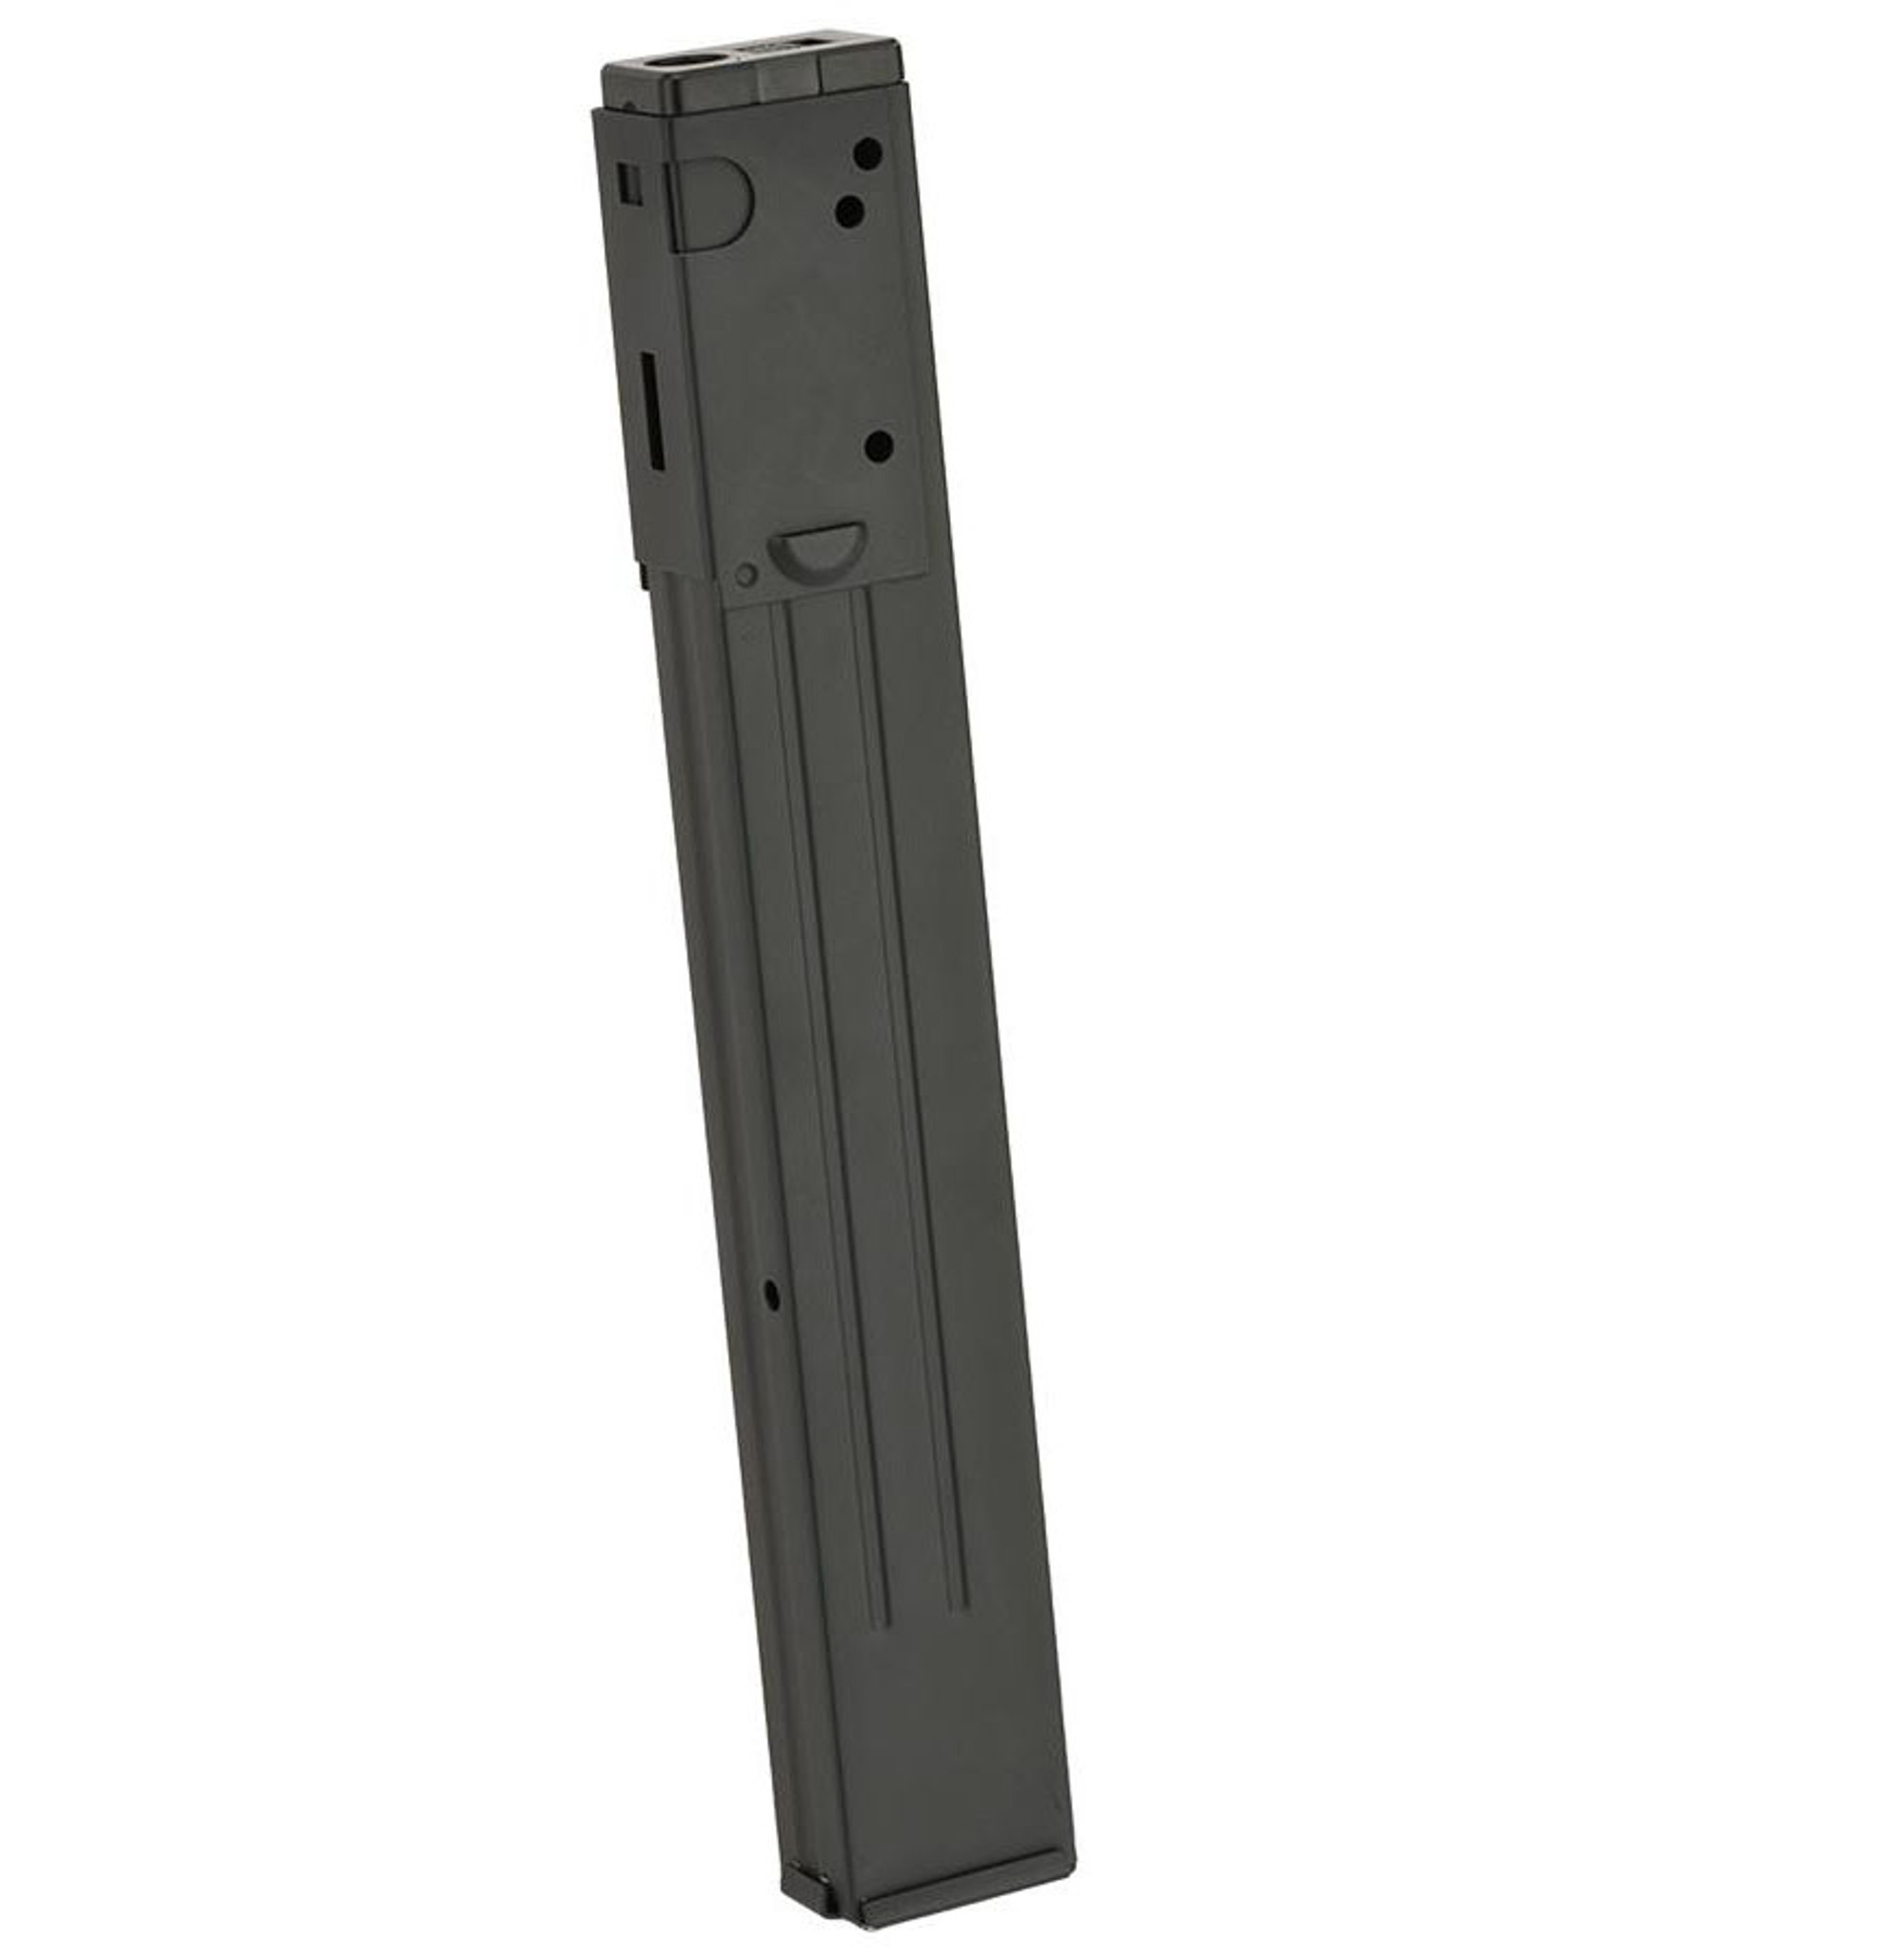 55 Round Metal Mid-Cap Magazine for AGM MP40 and Sten MKII Airsoft AEGs